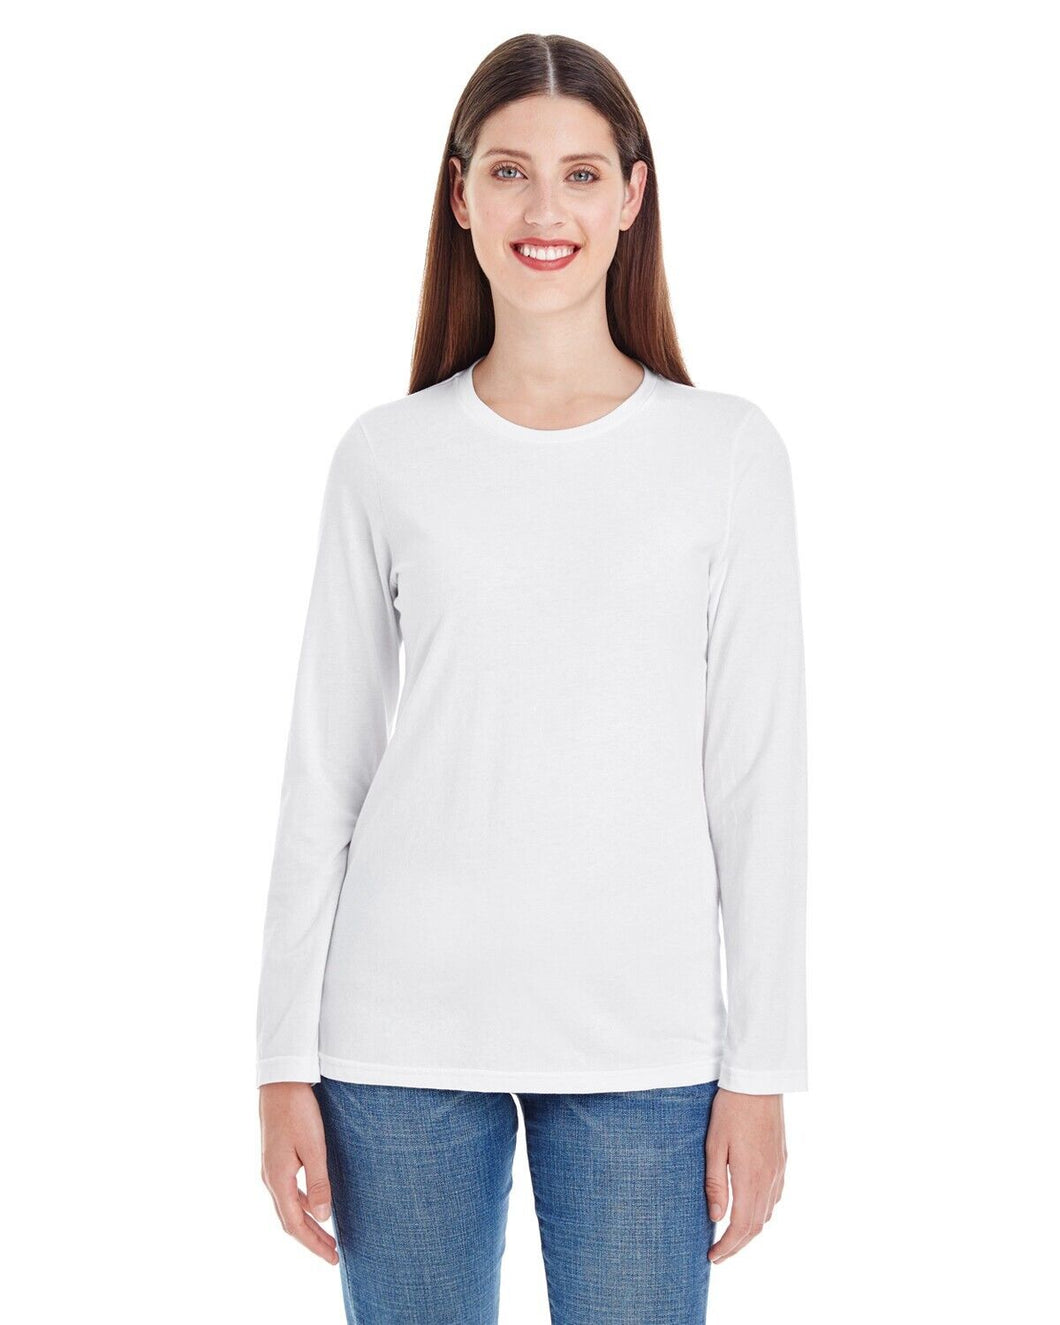 Women's' Classic Long-Sleeve Tee American Apparel Comfort Jersey White - MED